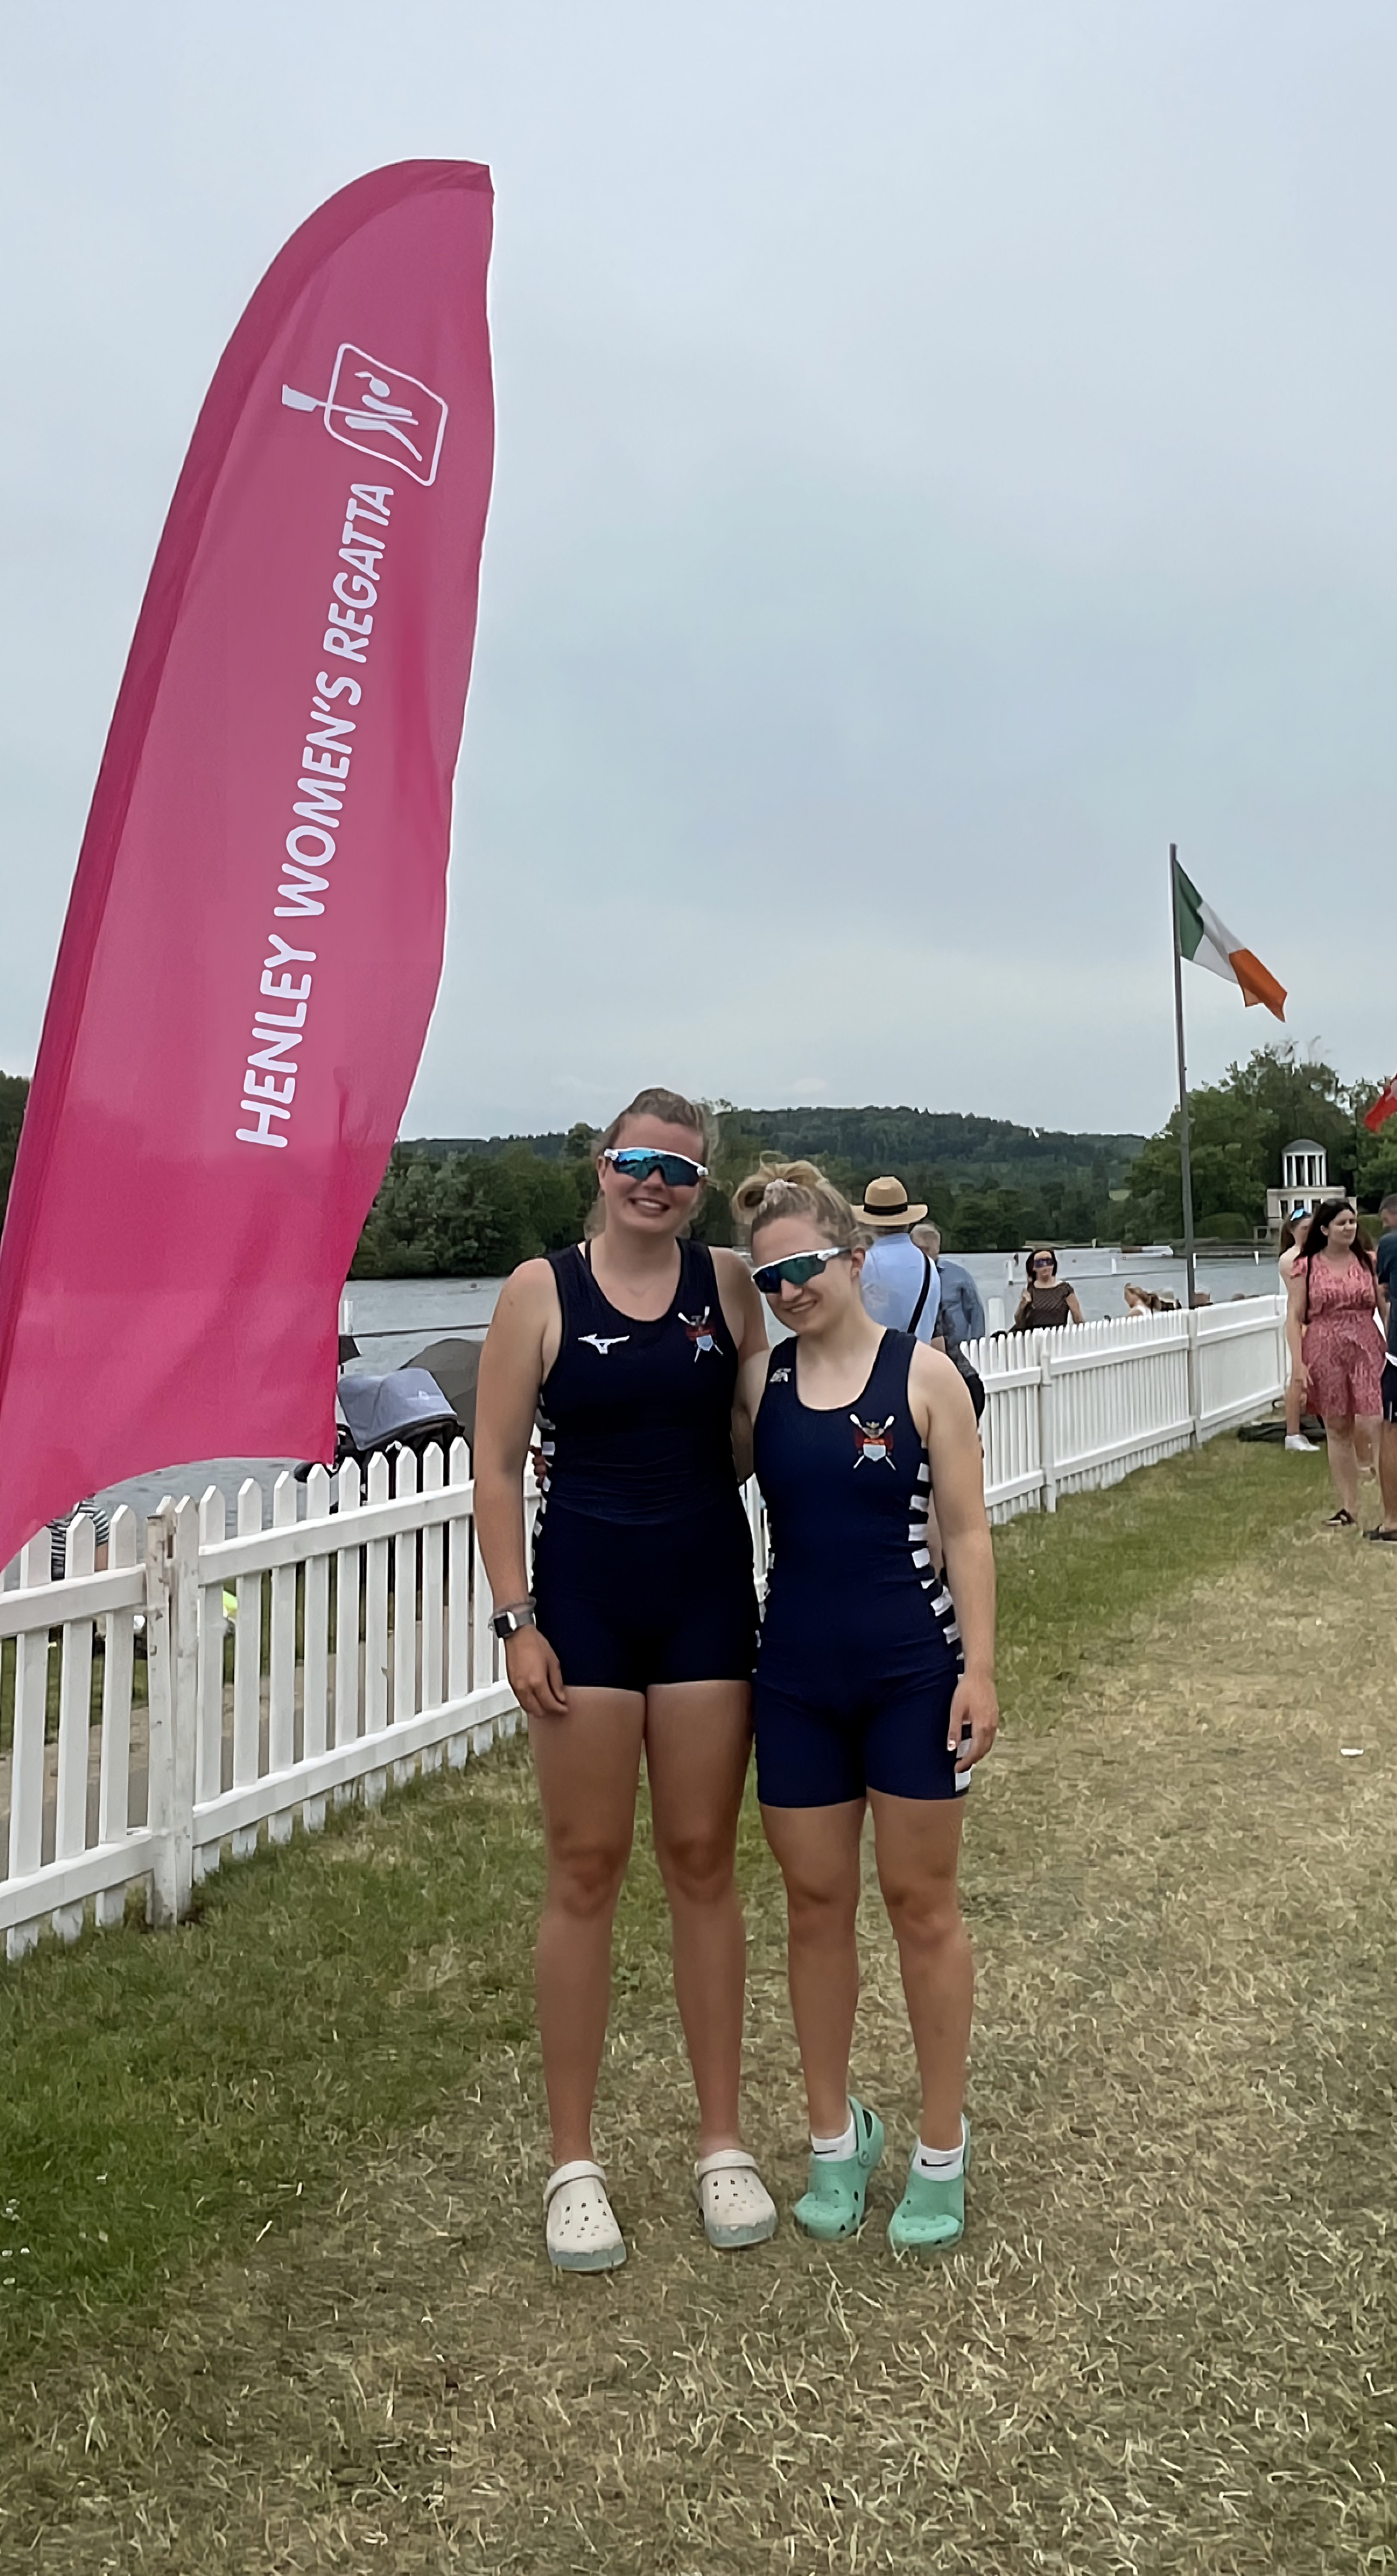 Martha Bullen and Amelia Moule from Sudbury Rowing Club standing together in front of a white picket fence, with the Henley Women's Regatta pink flag prominently displayed. They are wearing rowing kit and reflective sports sunglasses. 